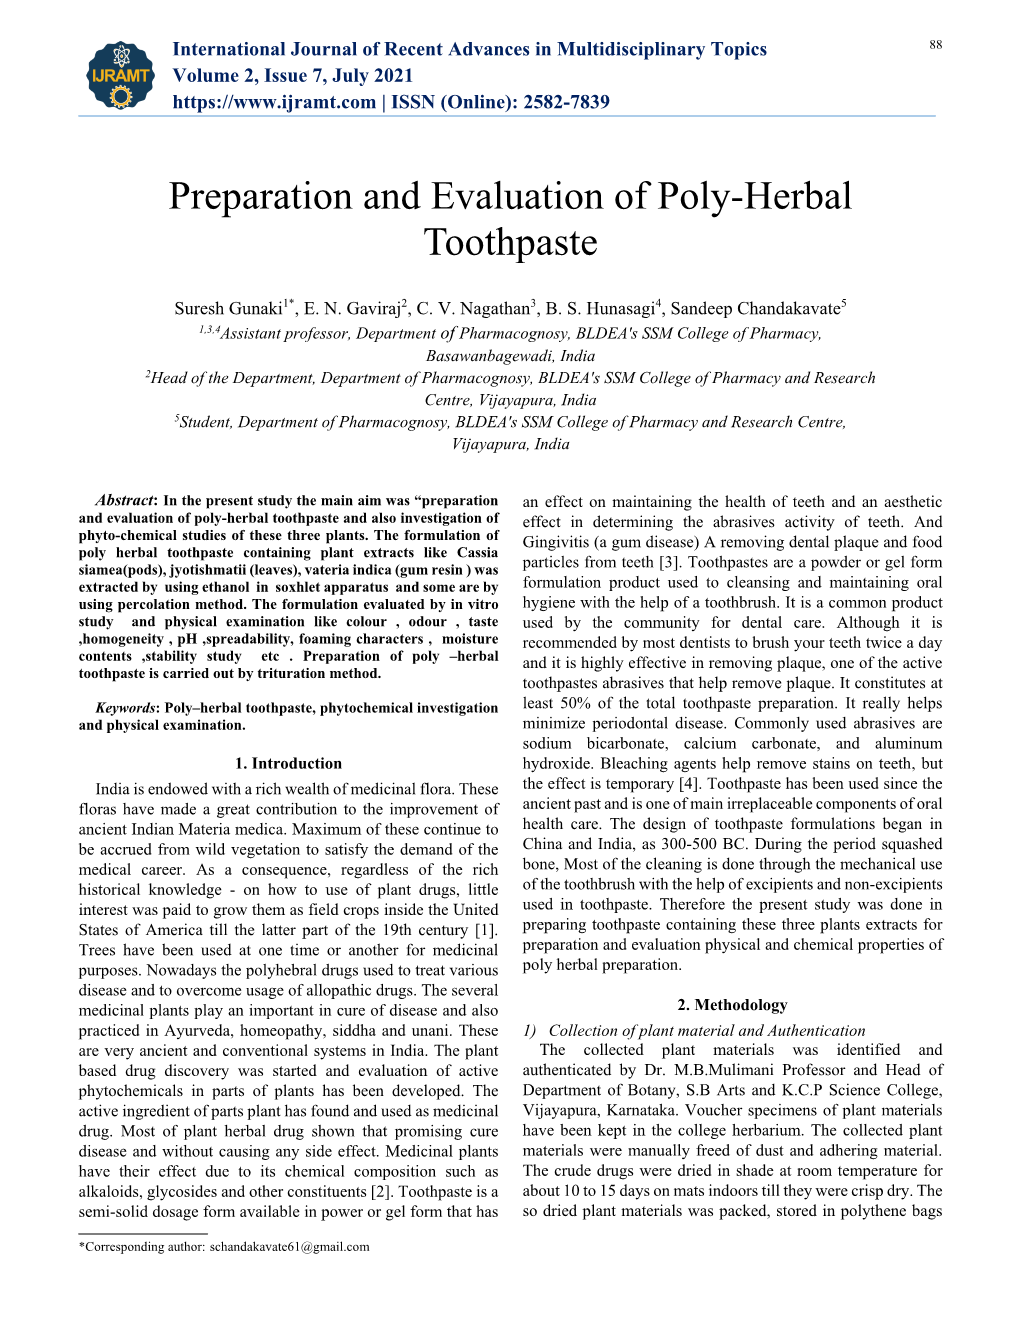 Preparation and Evaluation of Poly-Herbal Toothpaste